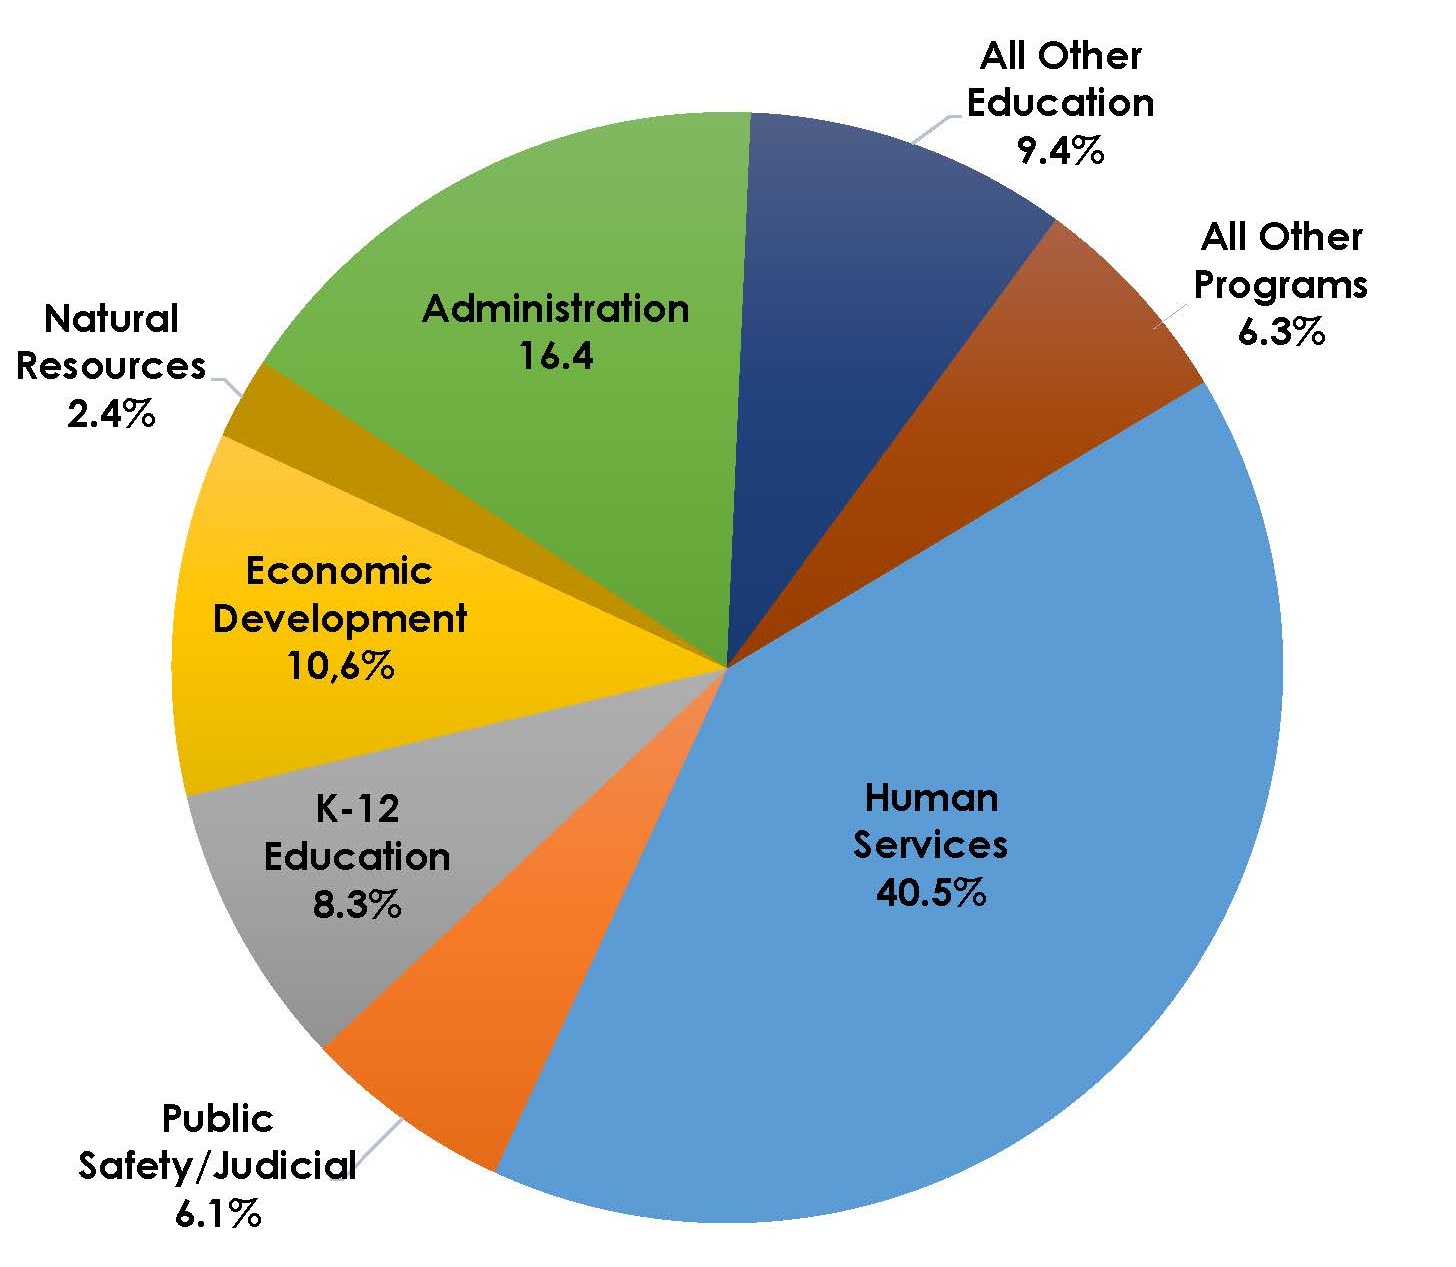 Pie chart: Human services 40.5% Public Safety 6.1% K-12 Education 8.3% Economic Development 10.6% Natural Resources 2.4% Administration 16.4% All other Education 9.4% other programs 6.3%